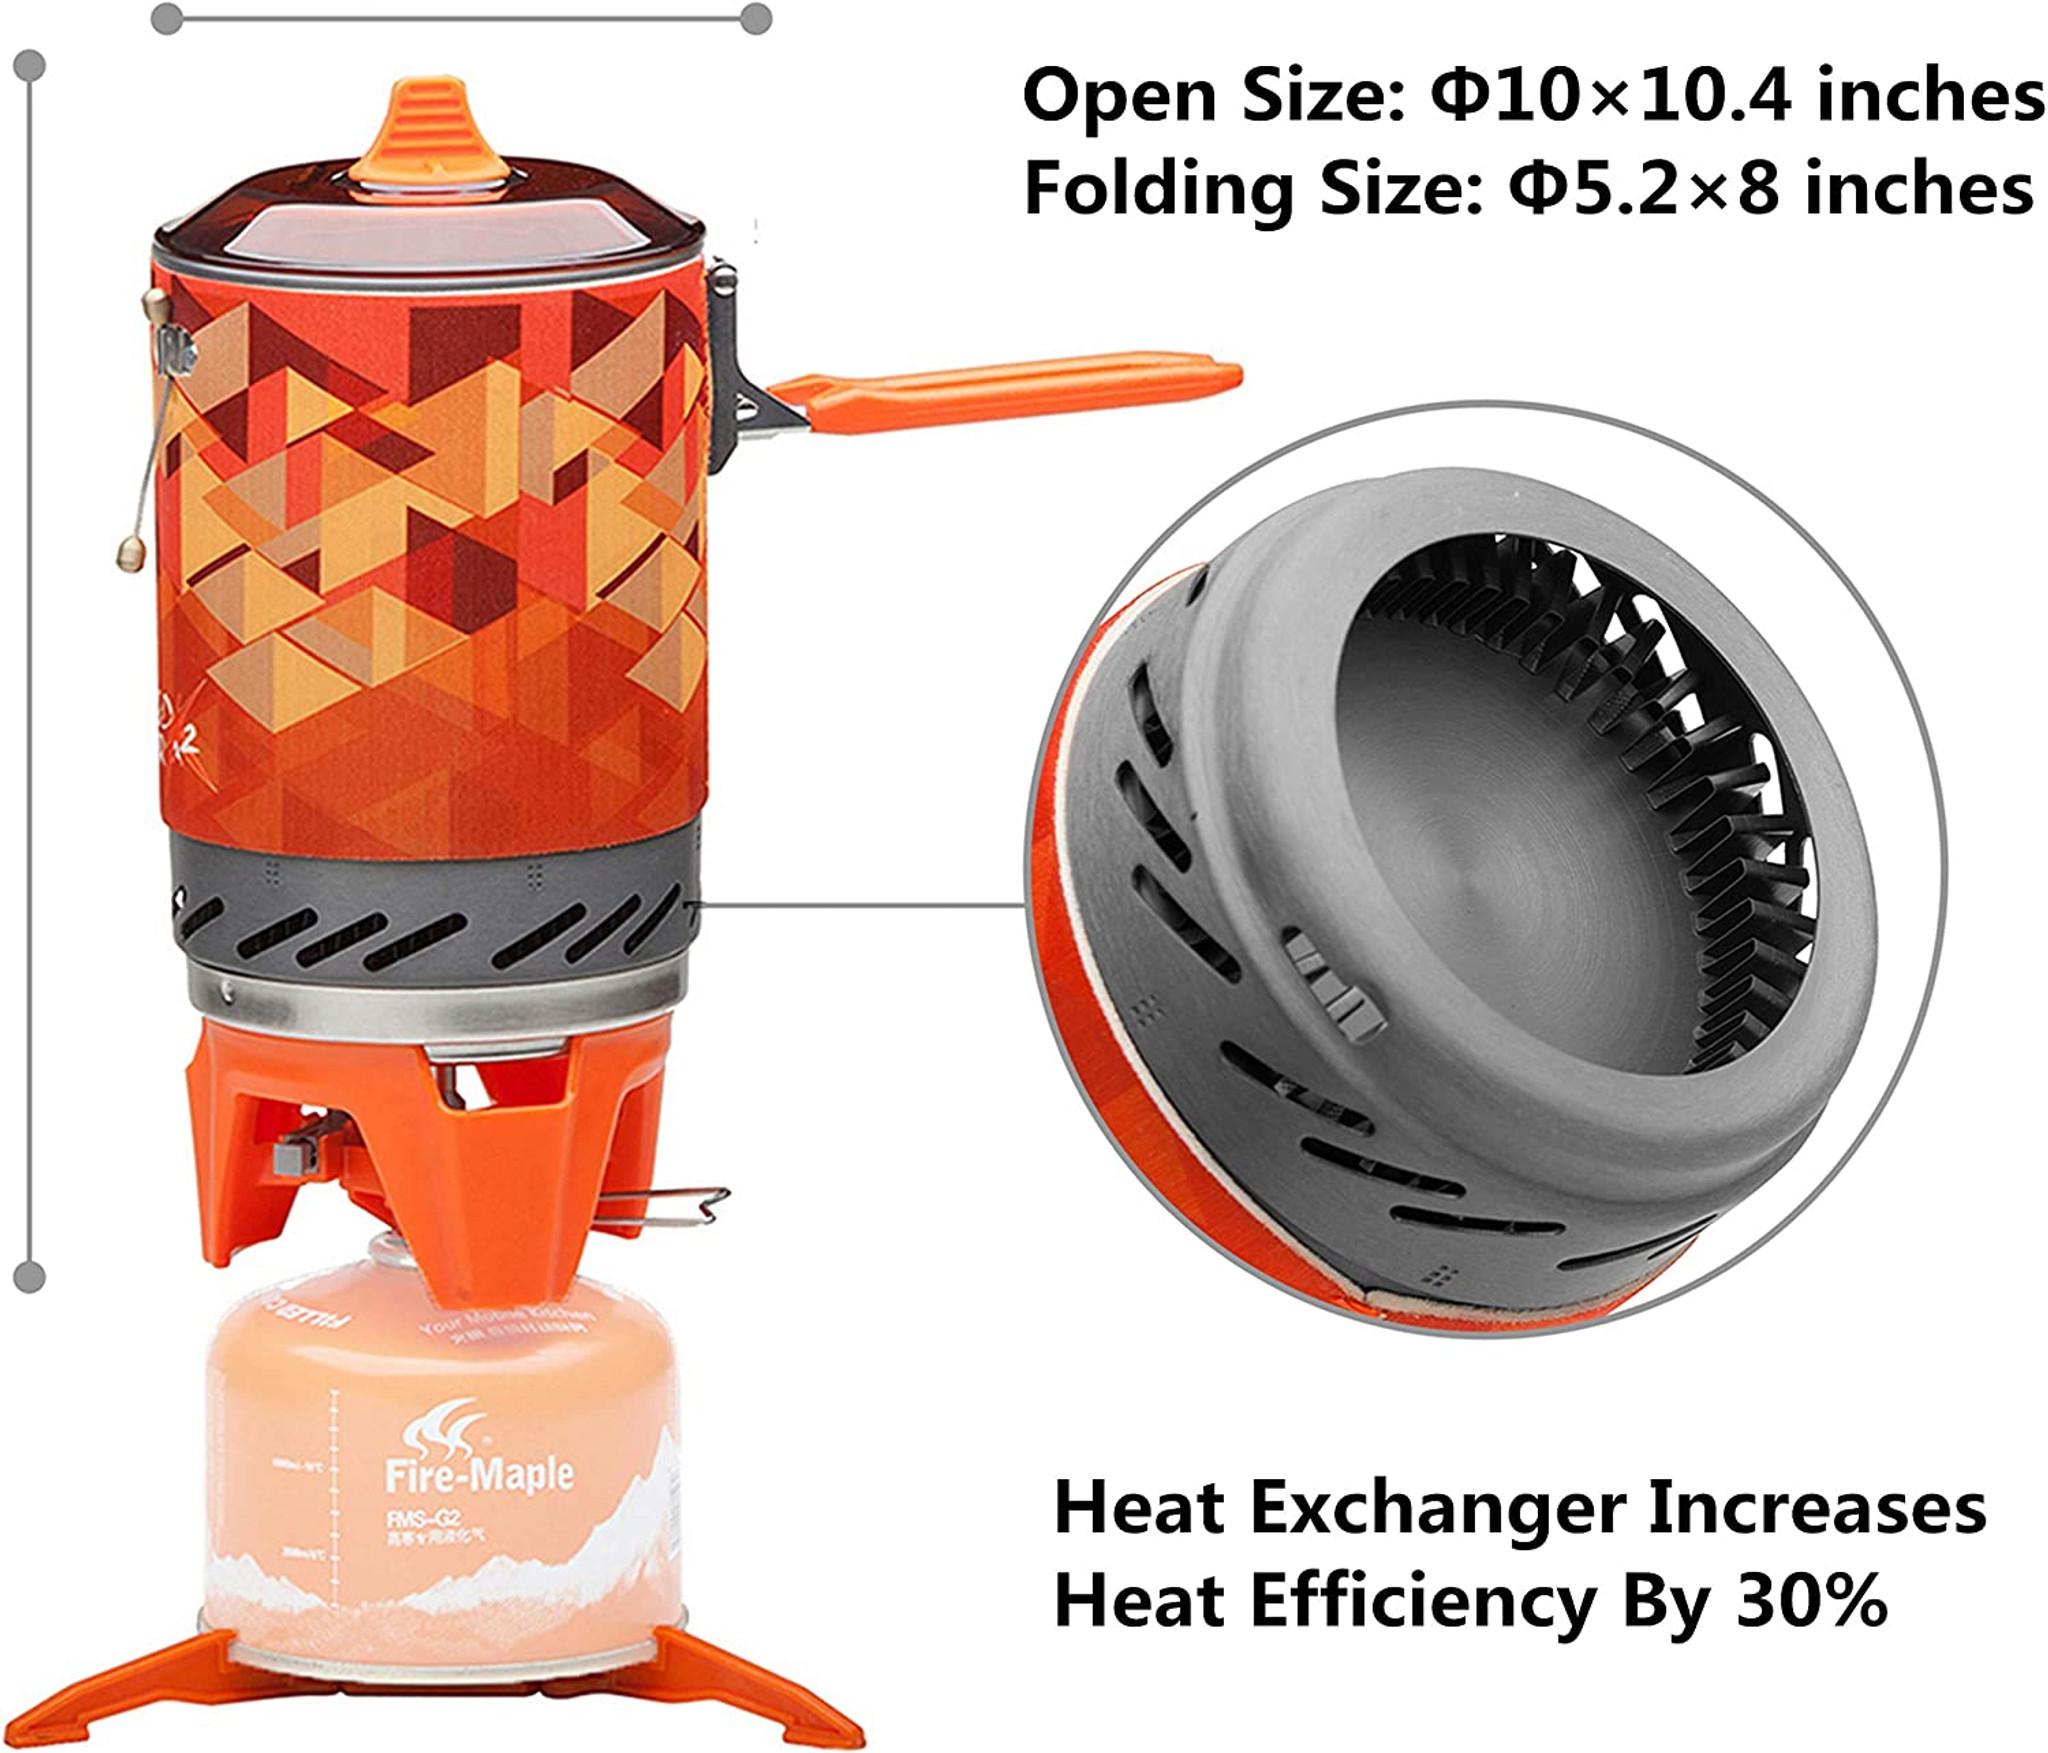 Fire-Maple Fixed Star X2 Backpacking and Camping Stove System Outdoor